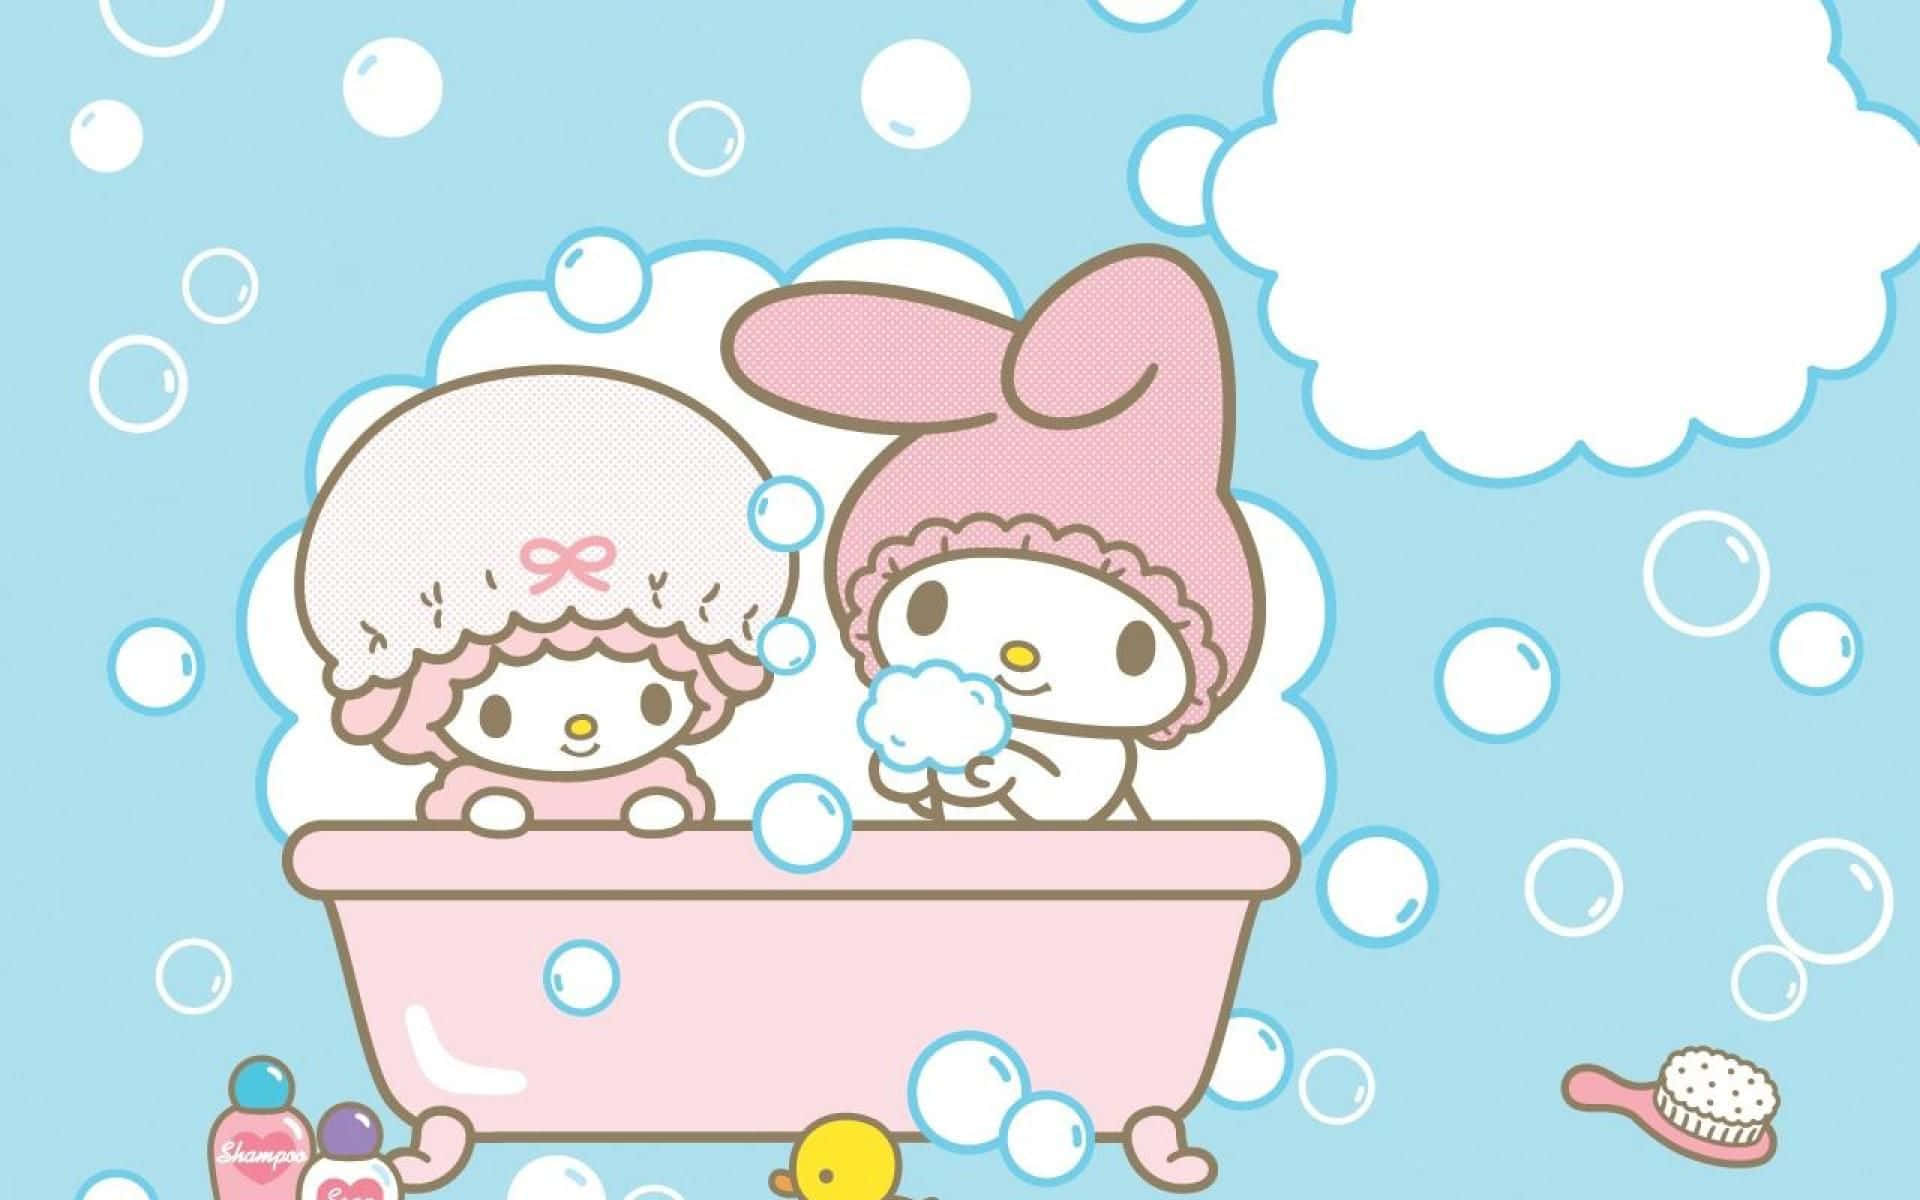 Capture Every Moment with My Melody Laptop Wallpaper